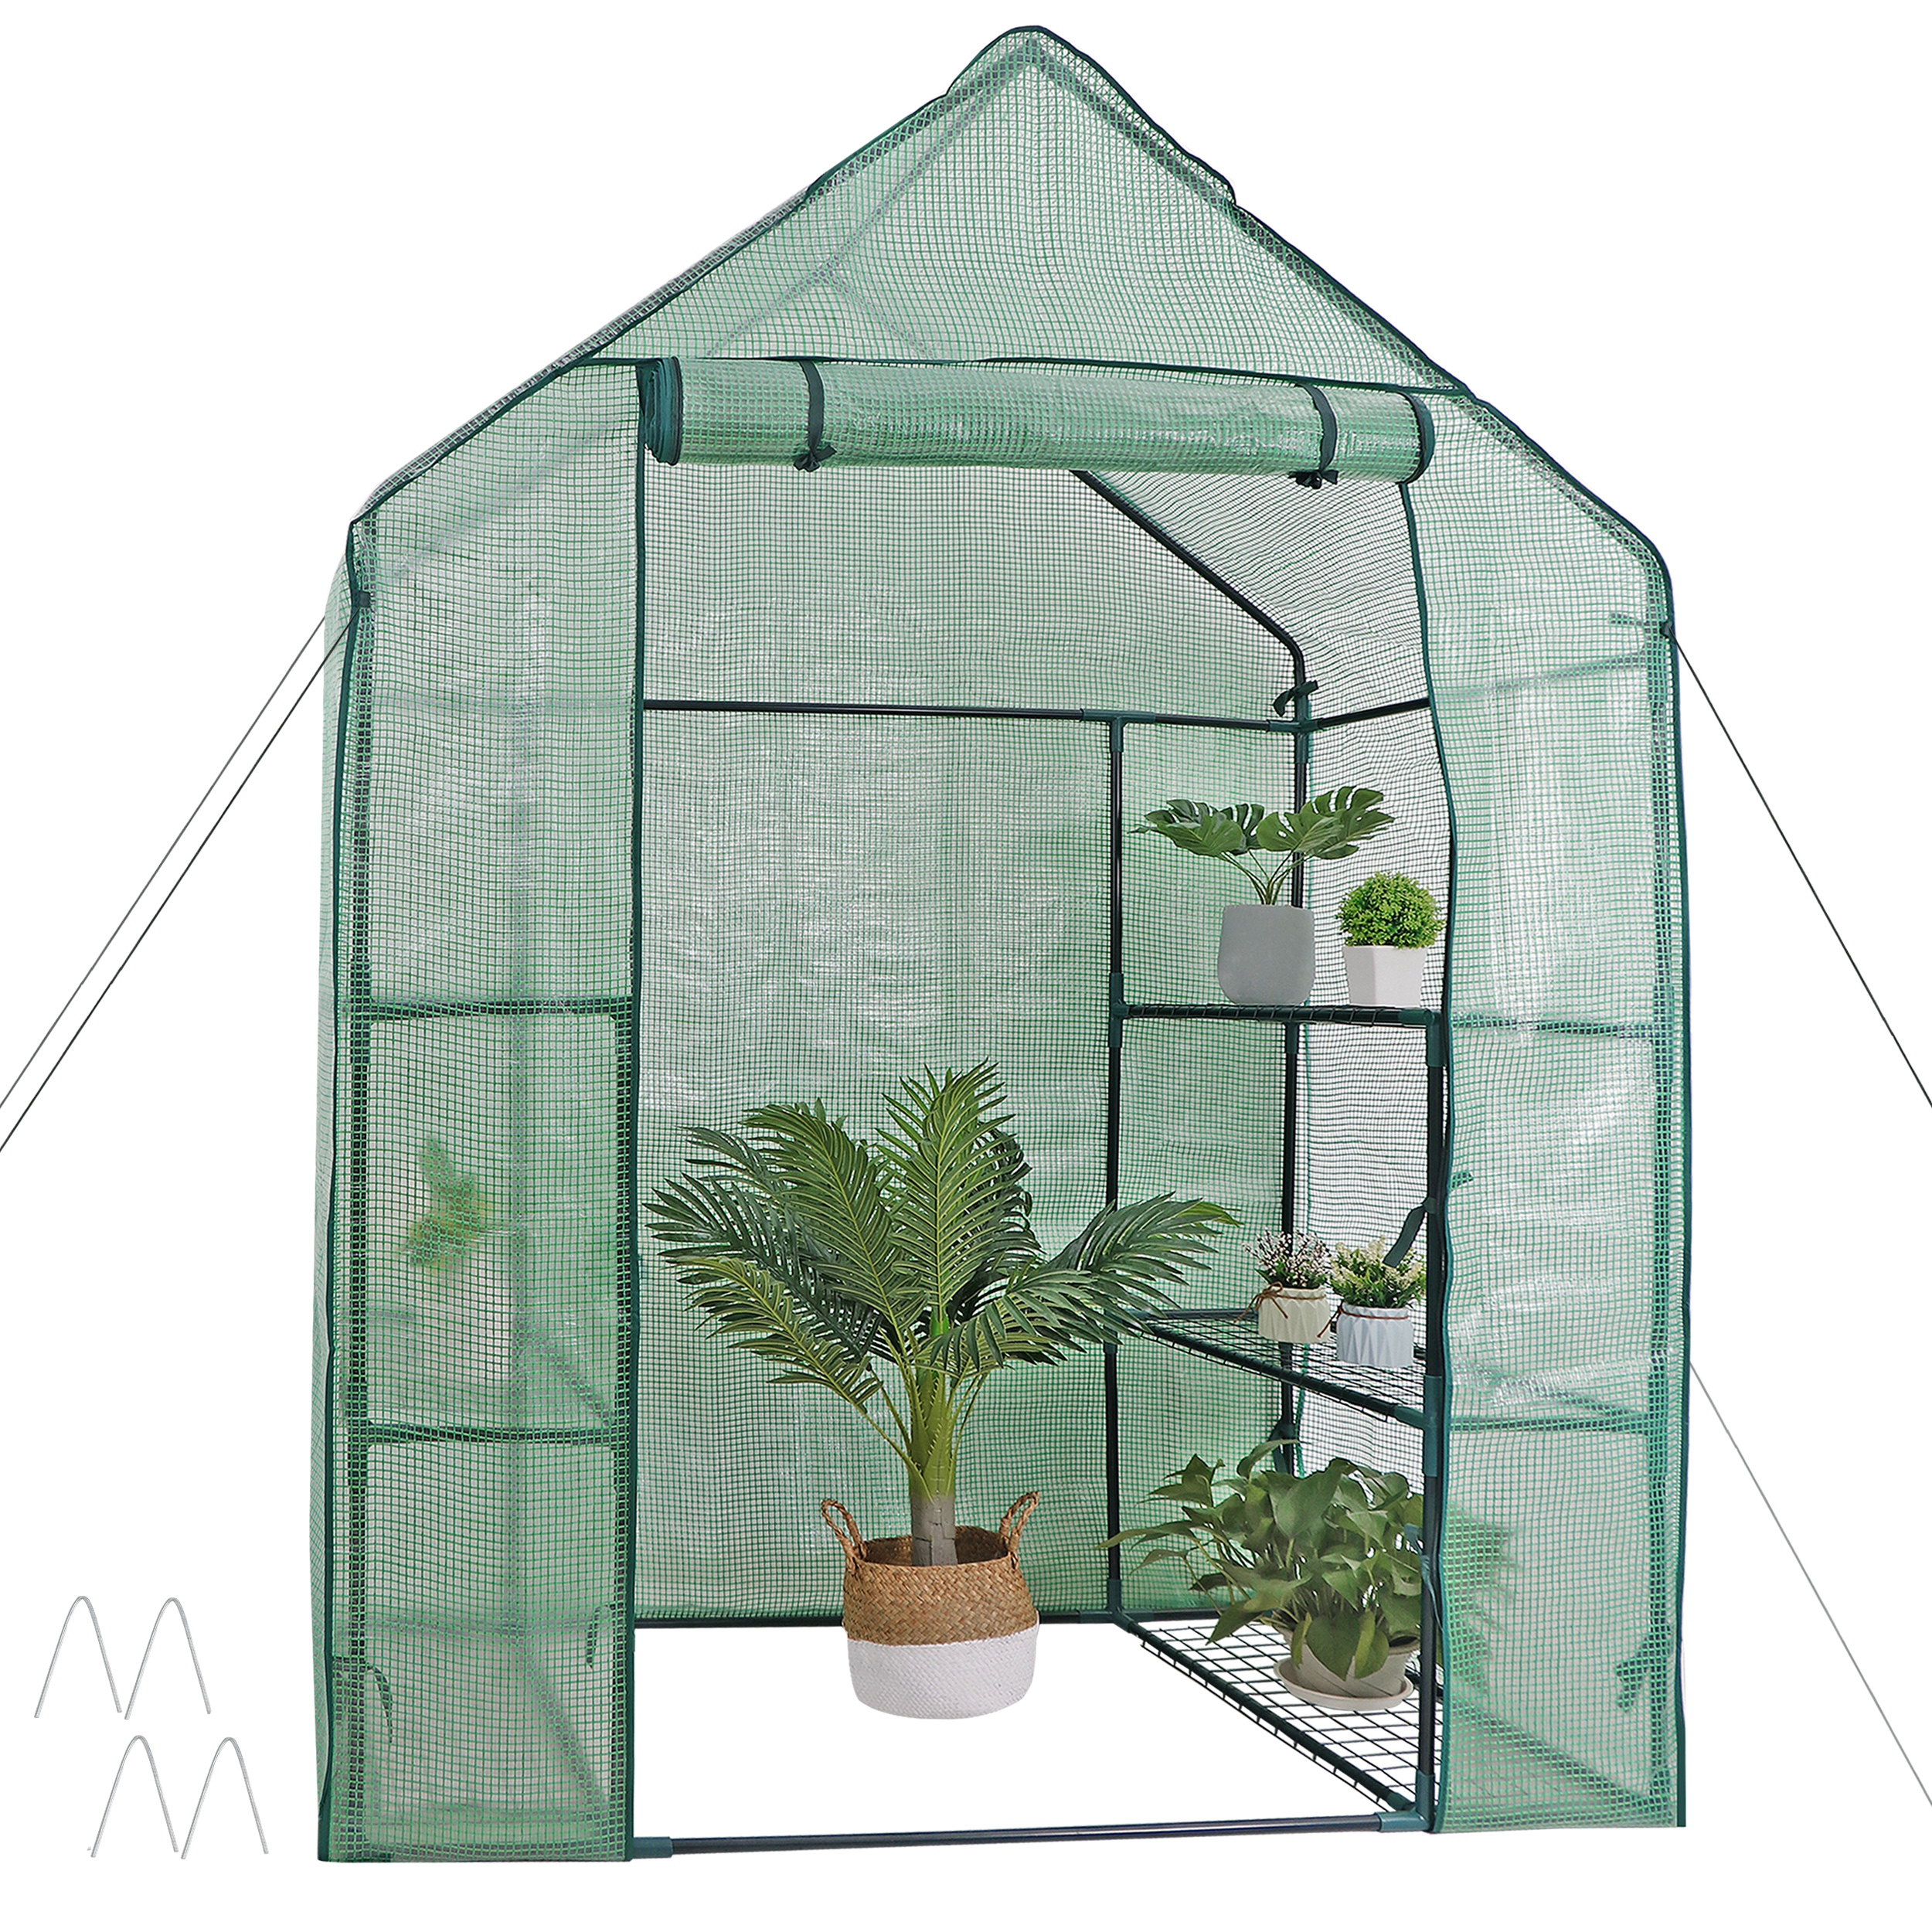 ZENY Mini Walk-in Green House Garden 3 Tier 6 Shelves Movable Plant Greenhouse 55.9 x 28.3 x 75.6" - image 3 of 7